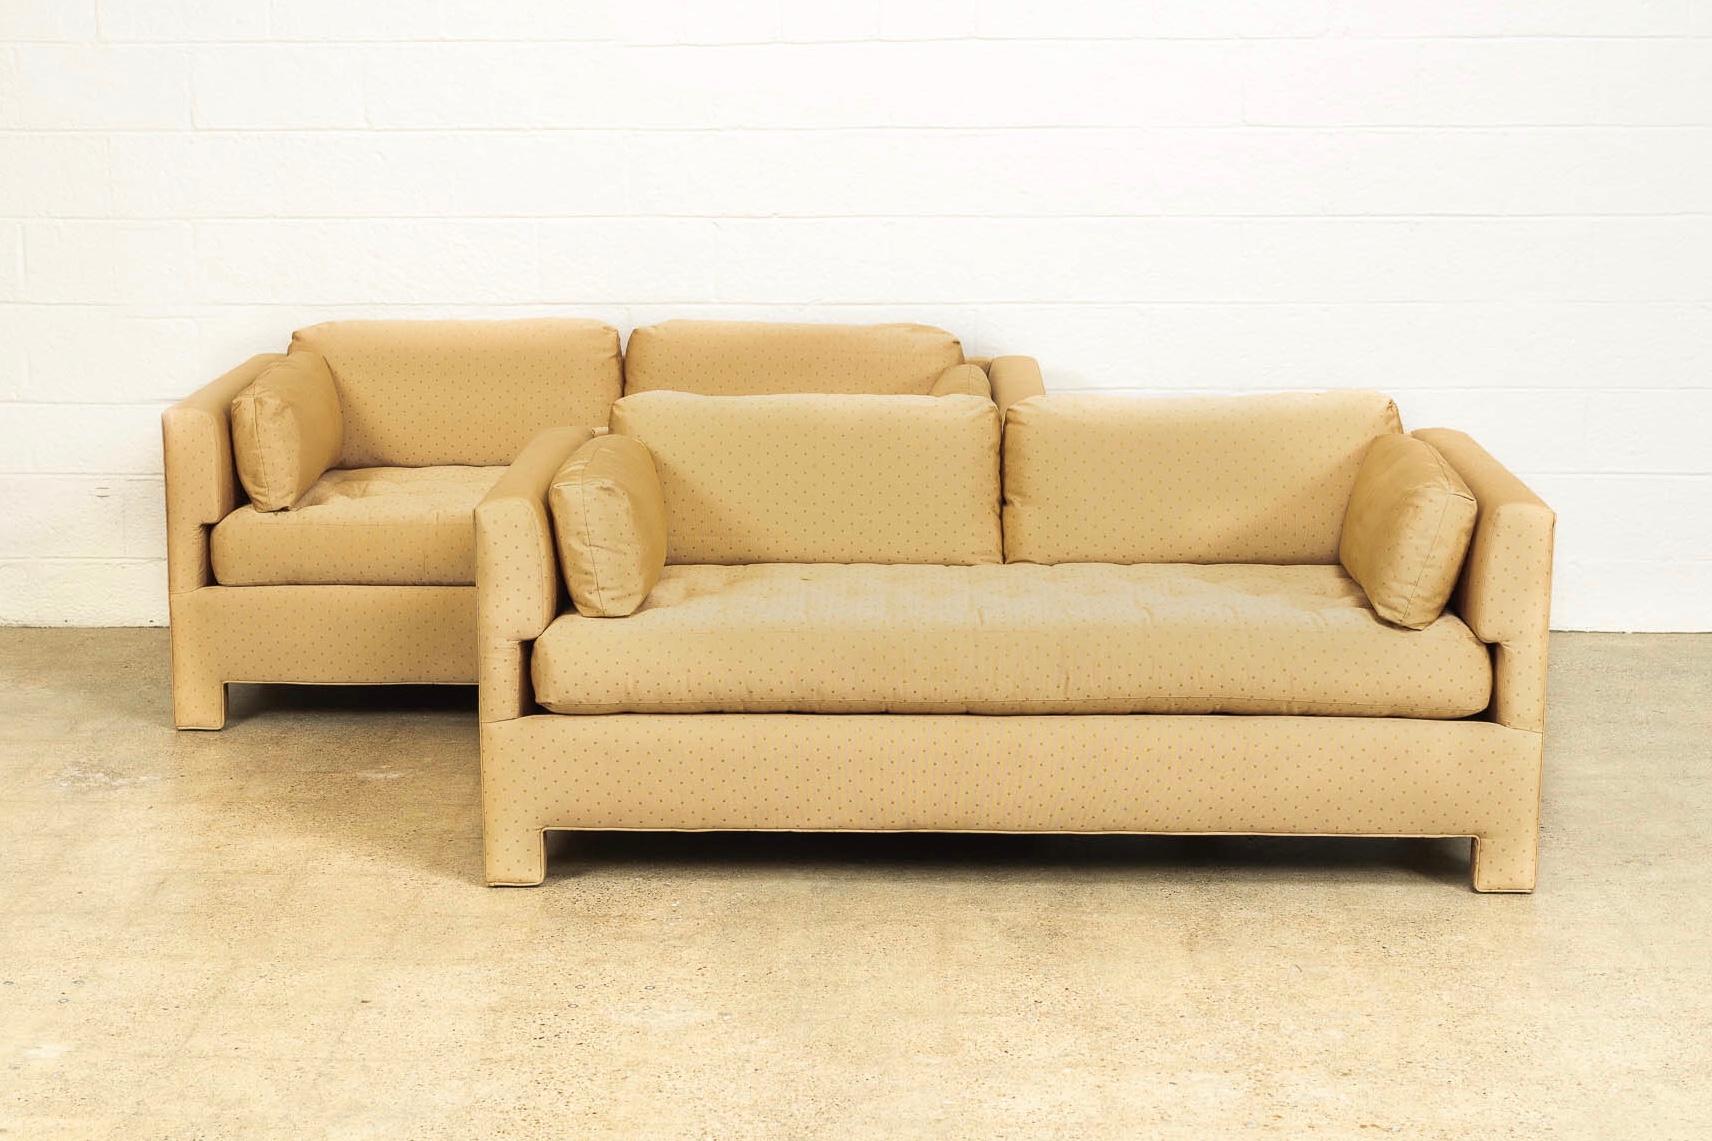 This pair of vintage Mid-Century Modern sofa couches in the style of Harvey Probber or Edward Wormley are circa 1960. With Classic midcentury styling, the sofas have an elegant profile with clean, Minimalist lines. The couches have one long button